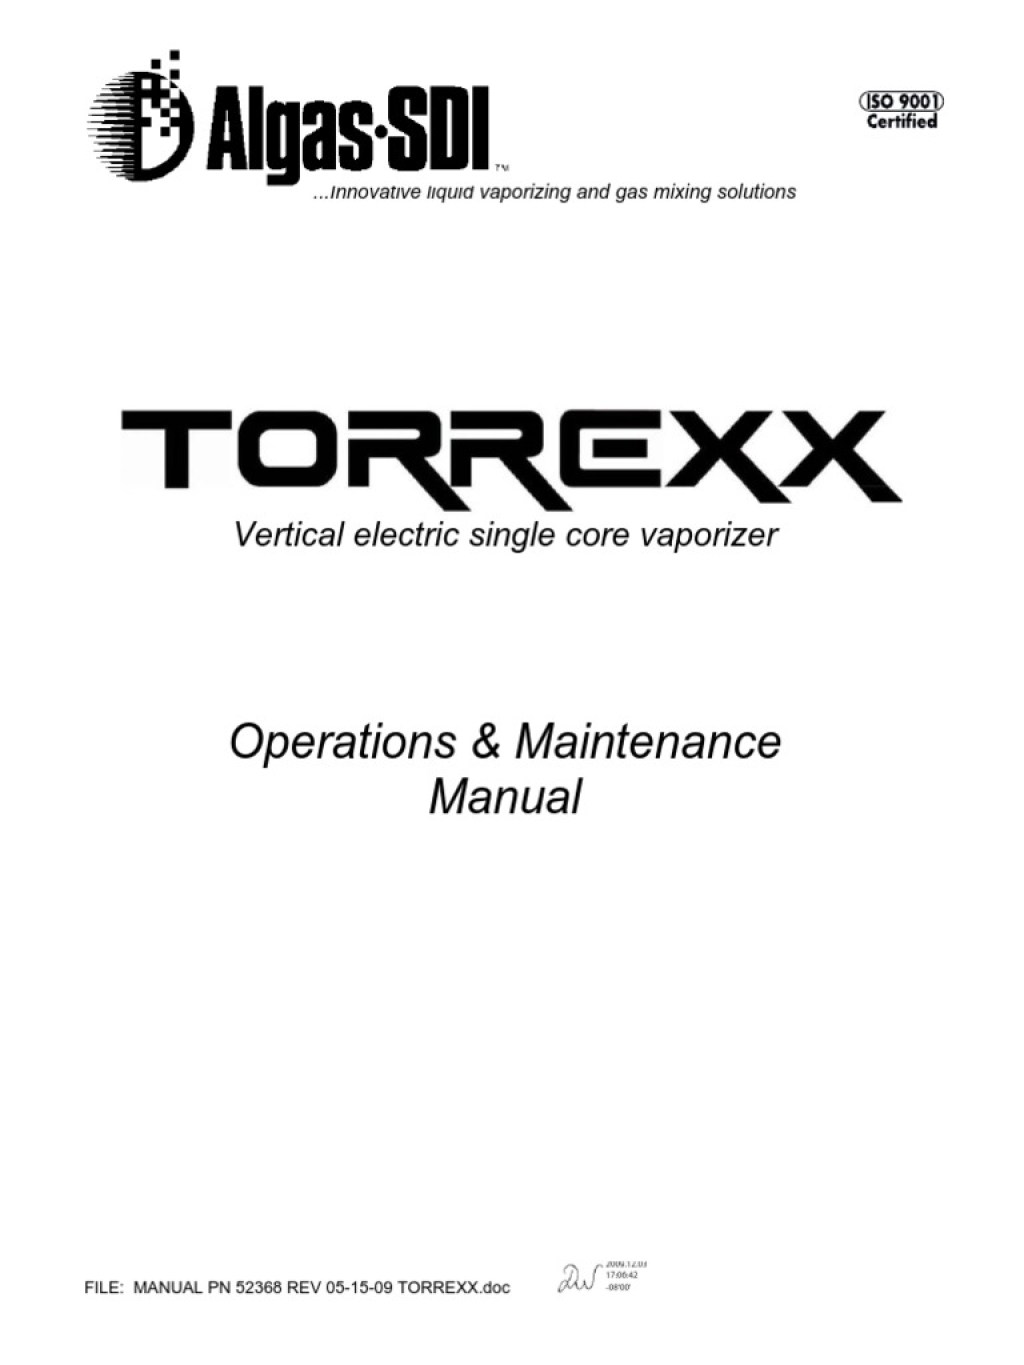 Picture of: Manual Torrexx   PDF  Valve  Fuse (Electrical)